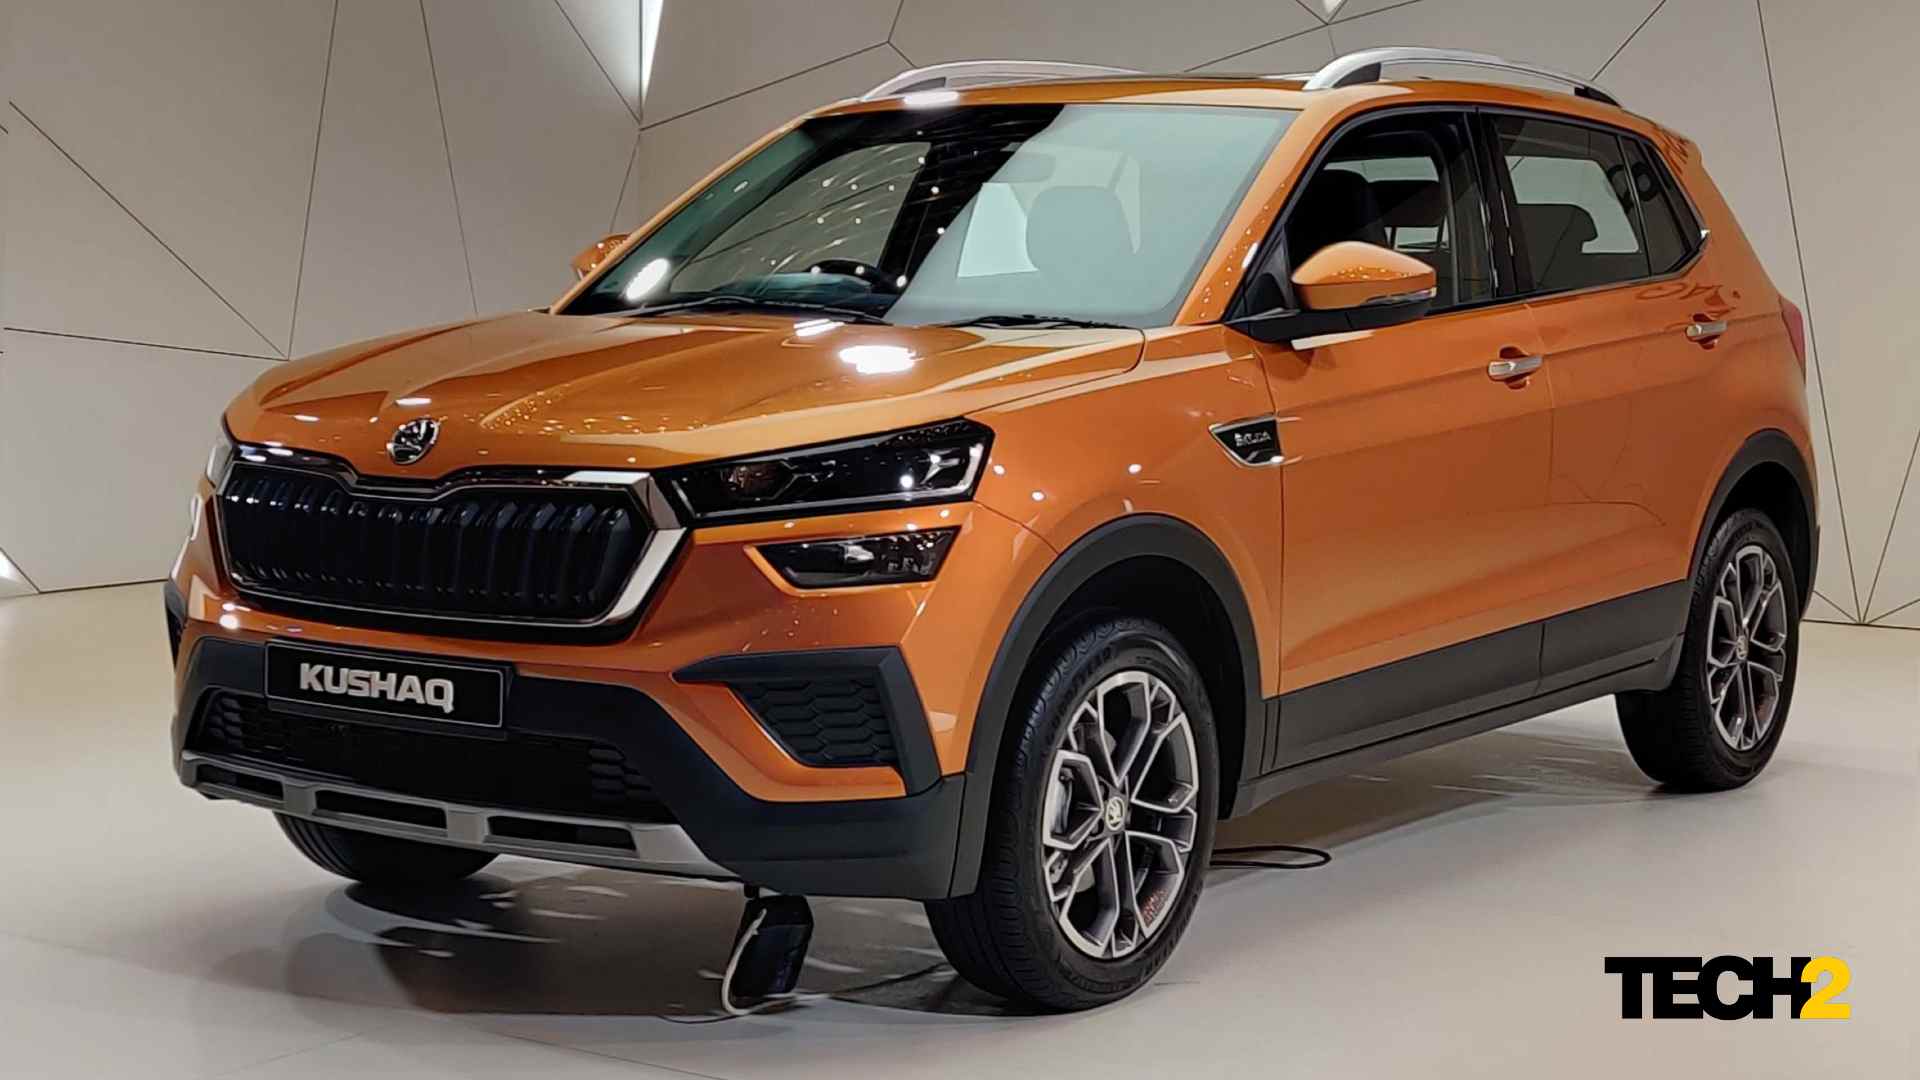  Skoda Kushaq price reveal in June, deliveries to commence in July